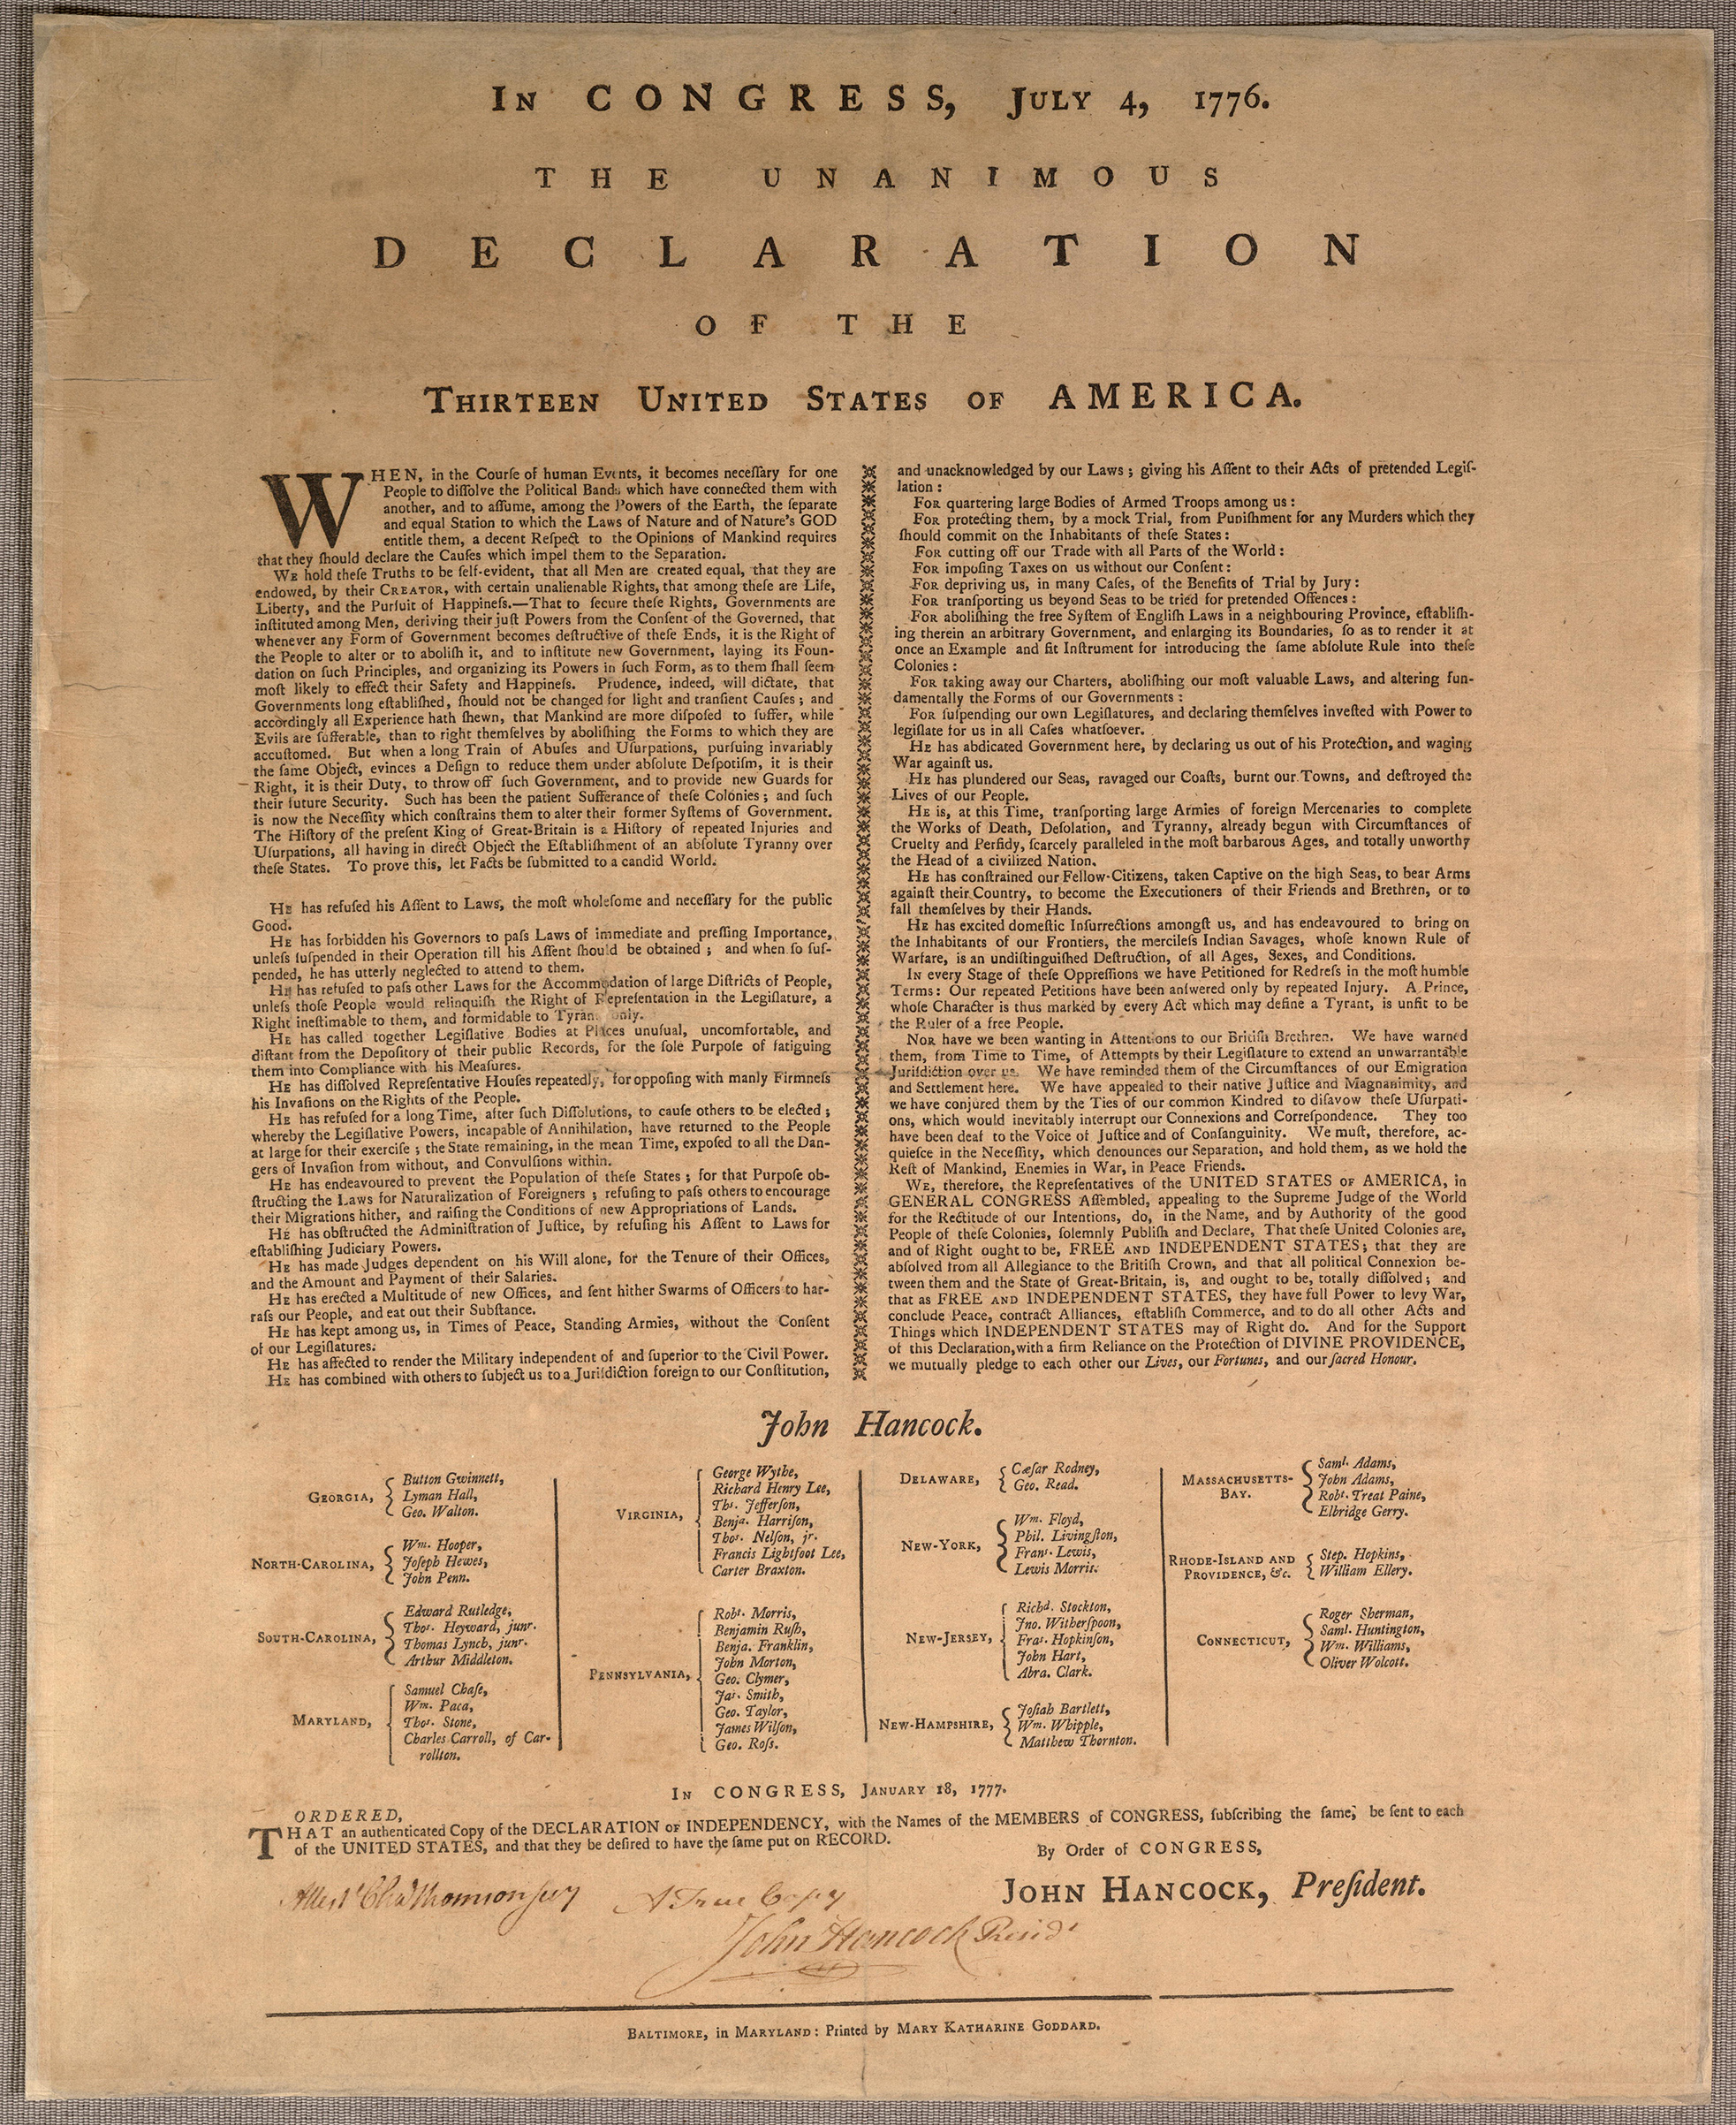 The copy of the Declaration of Independence, printed for preservation purposes in Jan. 1777 by Baltimore postmaster and newspaper publisher Mary Katherine Goddard. (Library of Congress, Rare Book and Special Collections Division, Continental Congress &amp; Constitutional Convention Broadsides Collection)